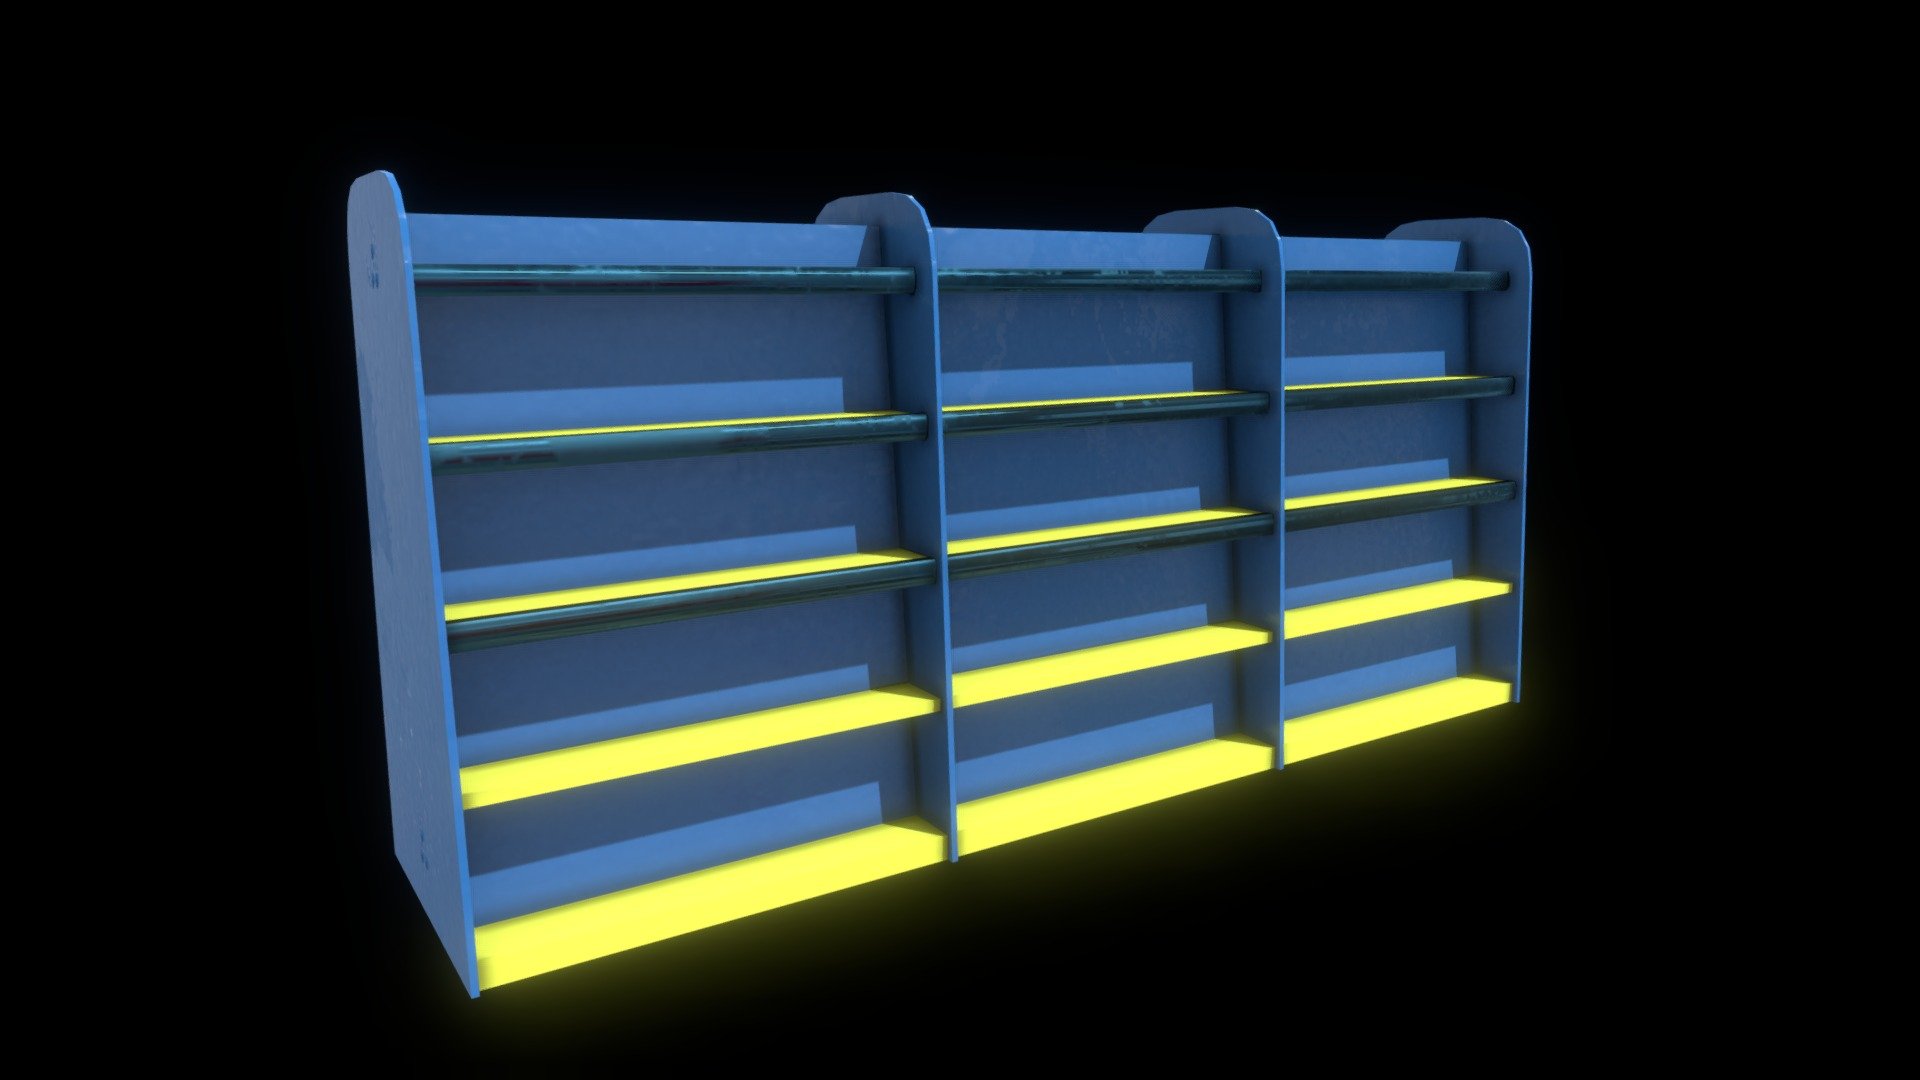 VHS bookshelf inspired by 90s video stores / blockbuster
Made by SM Sith Lord

https://twitter.com/anarchyarcade - VHS shelf - Download Free 3D model by m3org 3d model